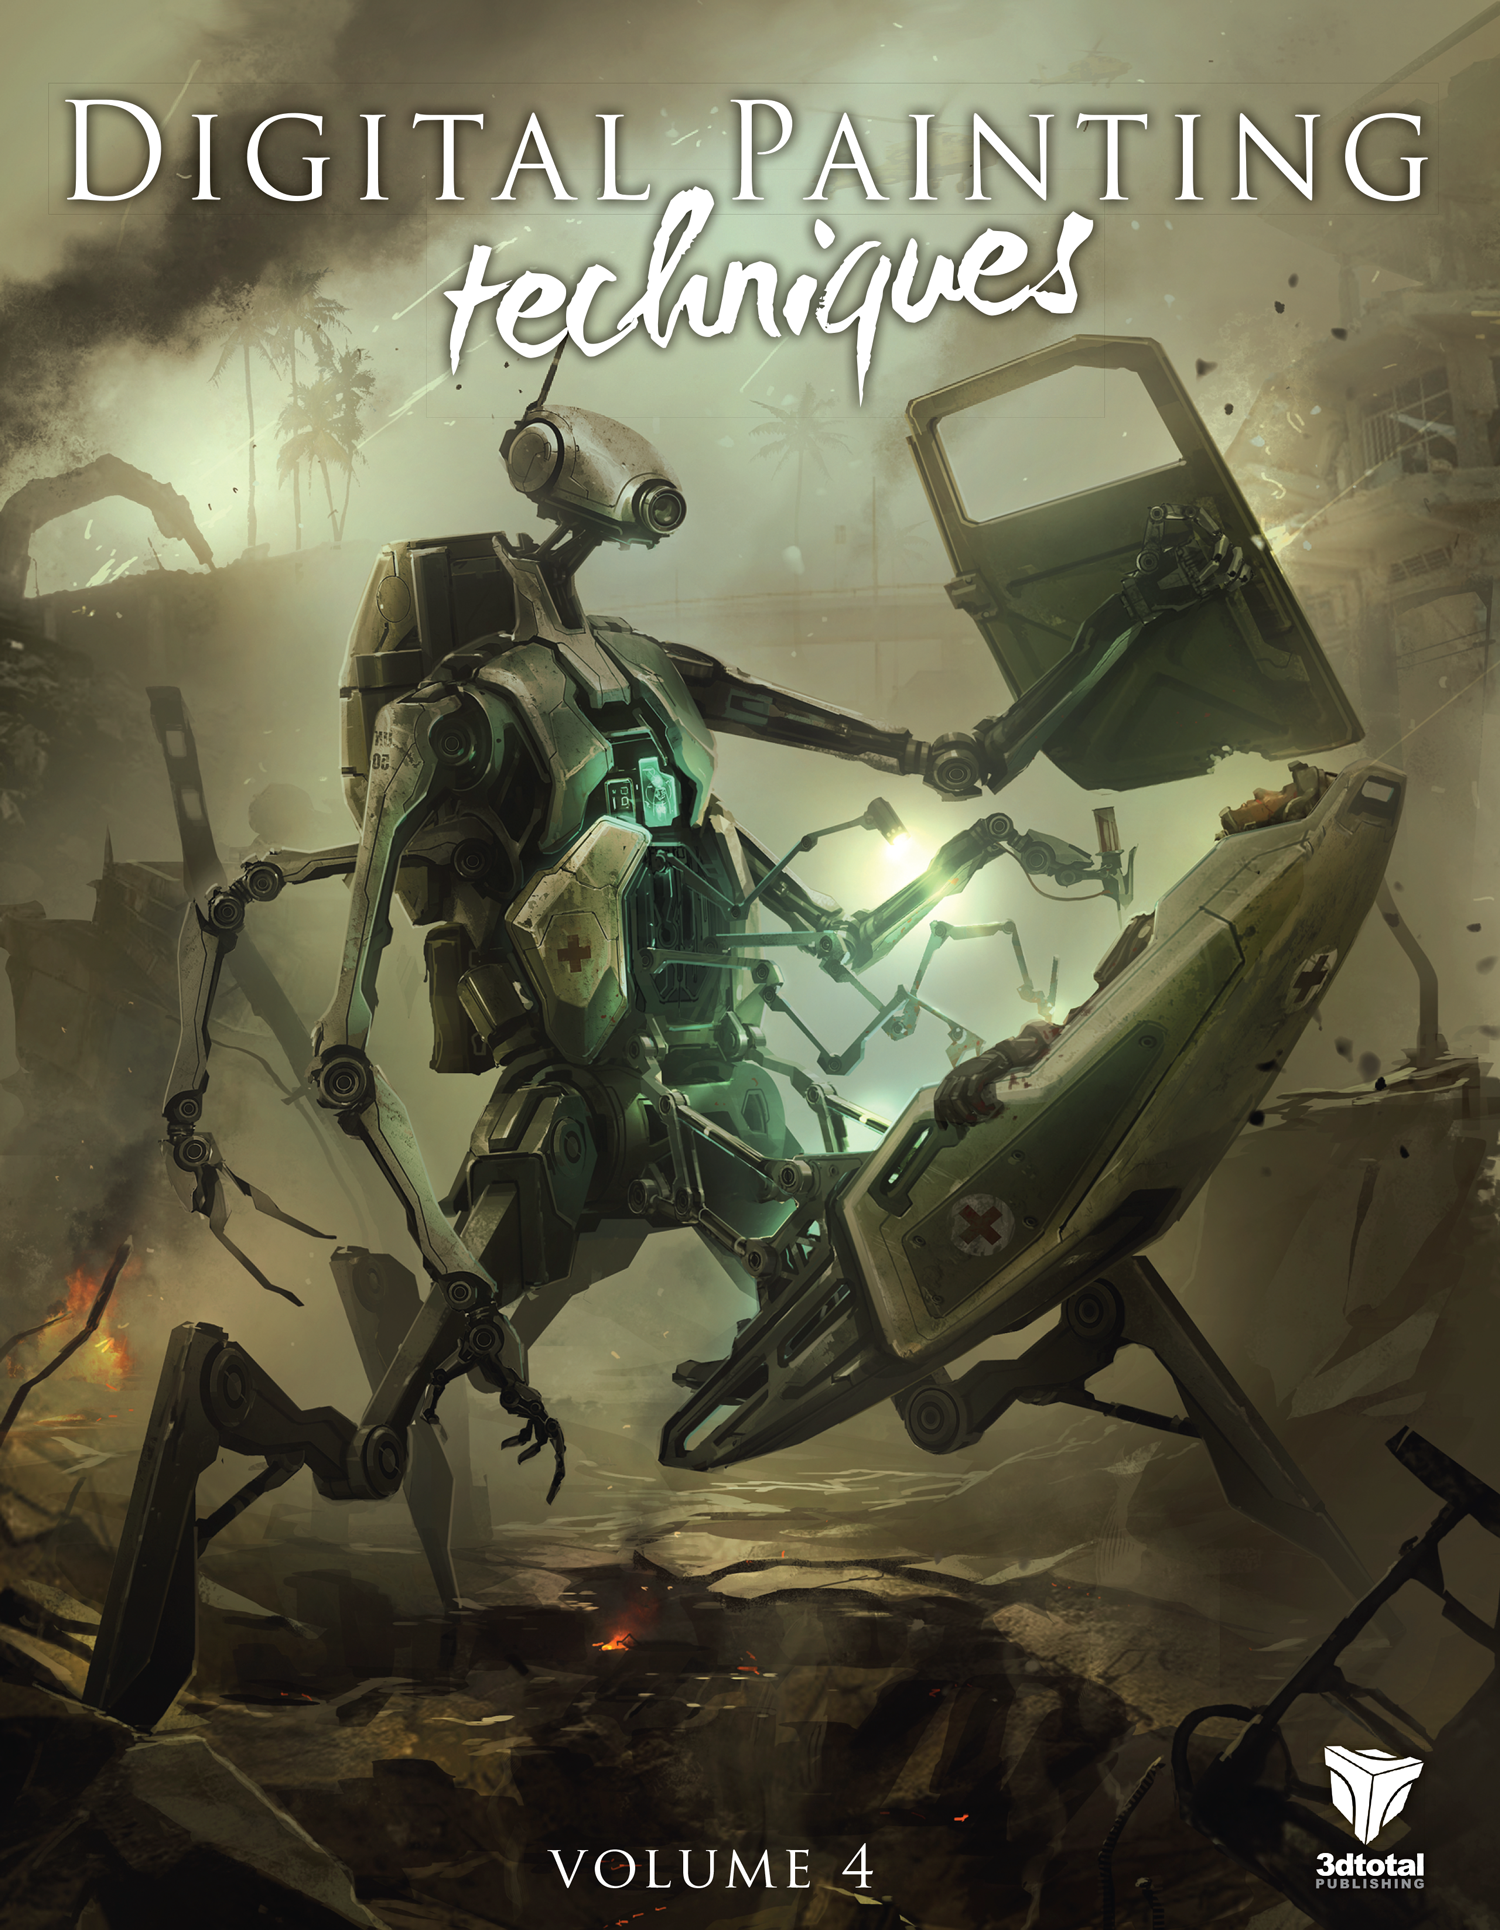 'Digital Painting Techniques: Volume 4' cover, showing a sci-fi scene of a robot medic transporting an injured human soldier.